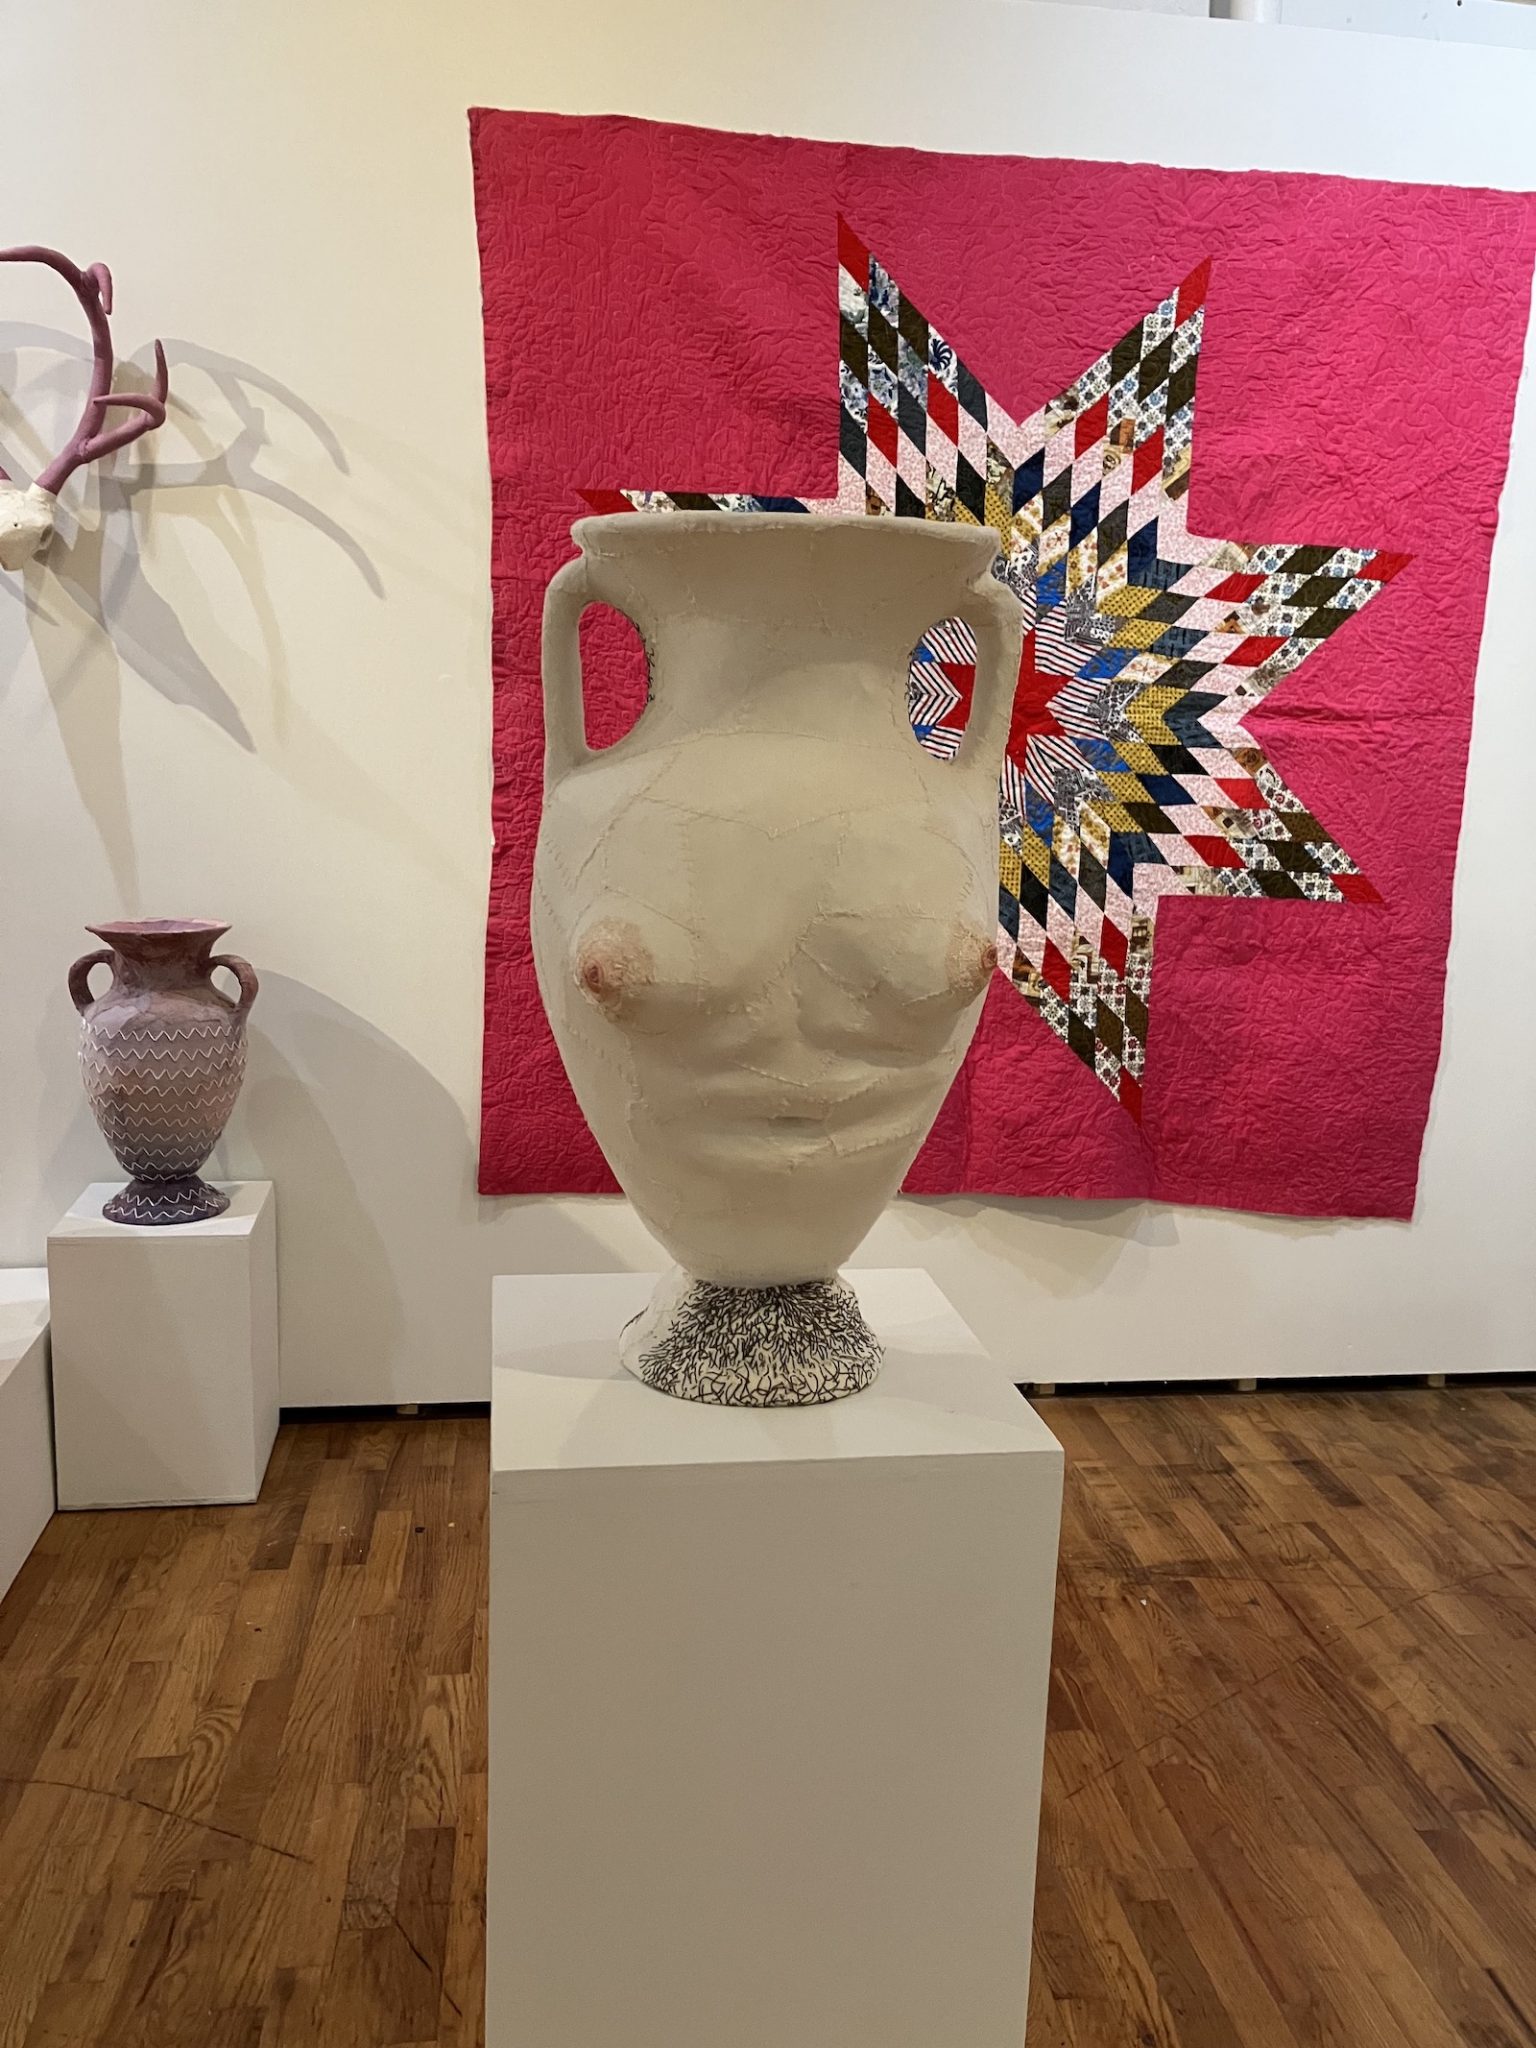 A collection of MFA artworks, mostly sculptures, in the gallery